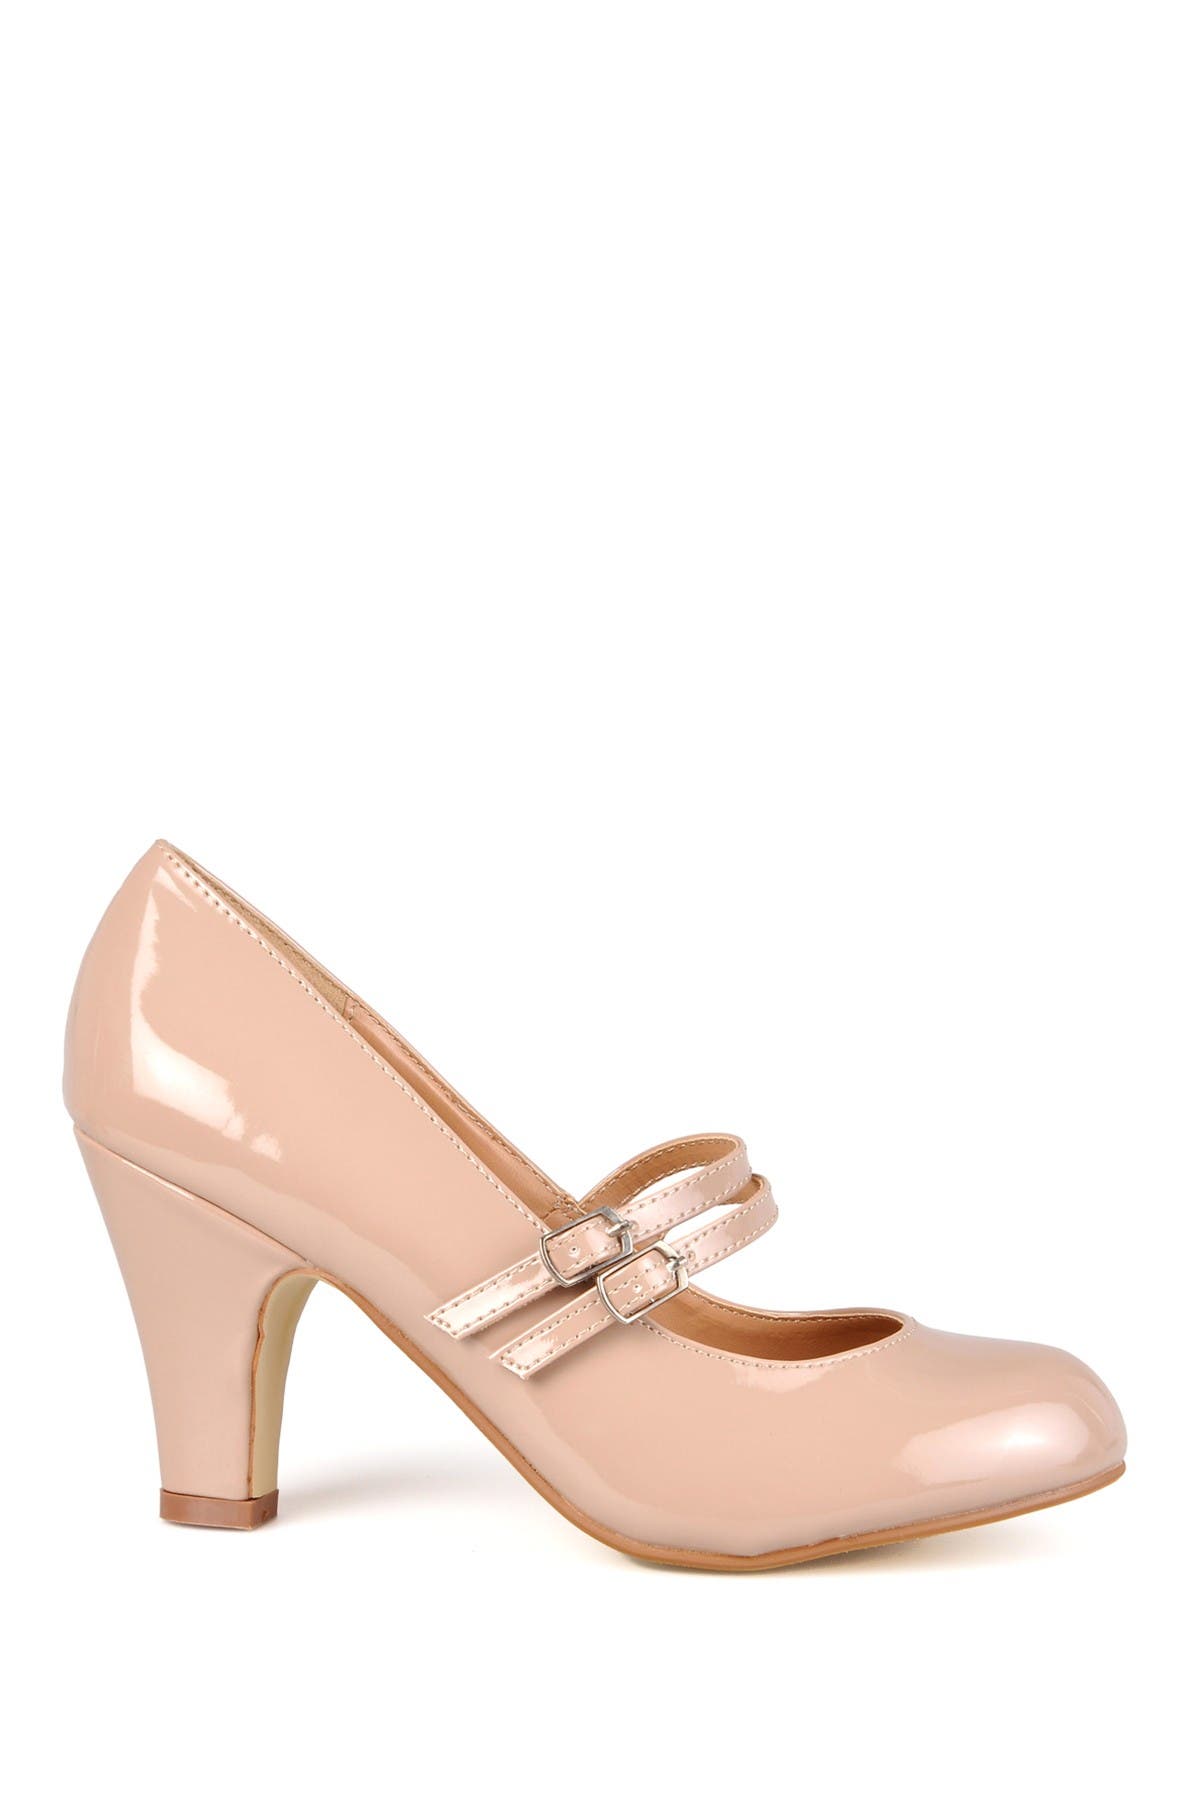 journee collection mary jane pumps